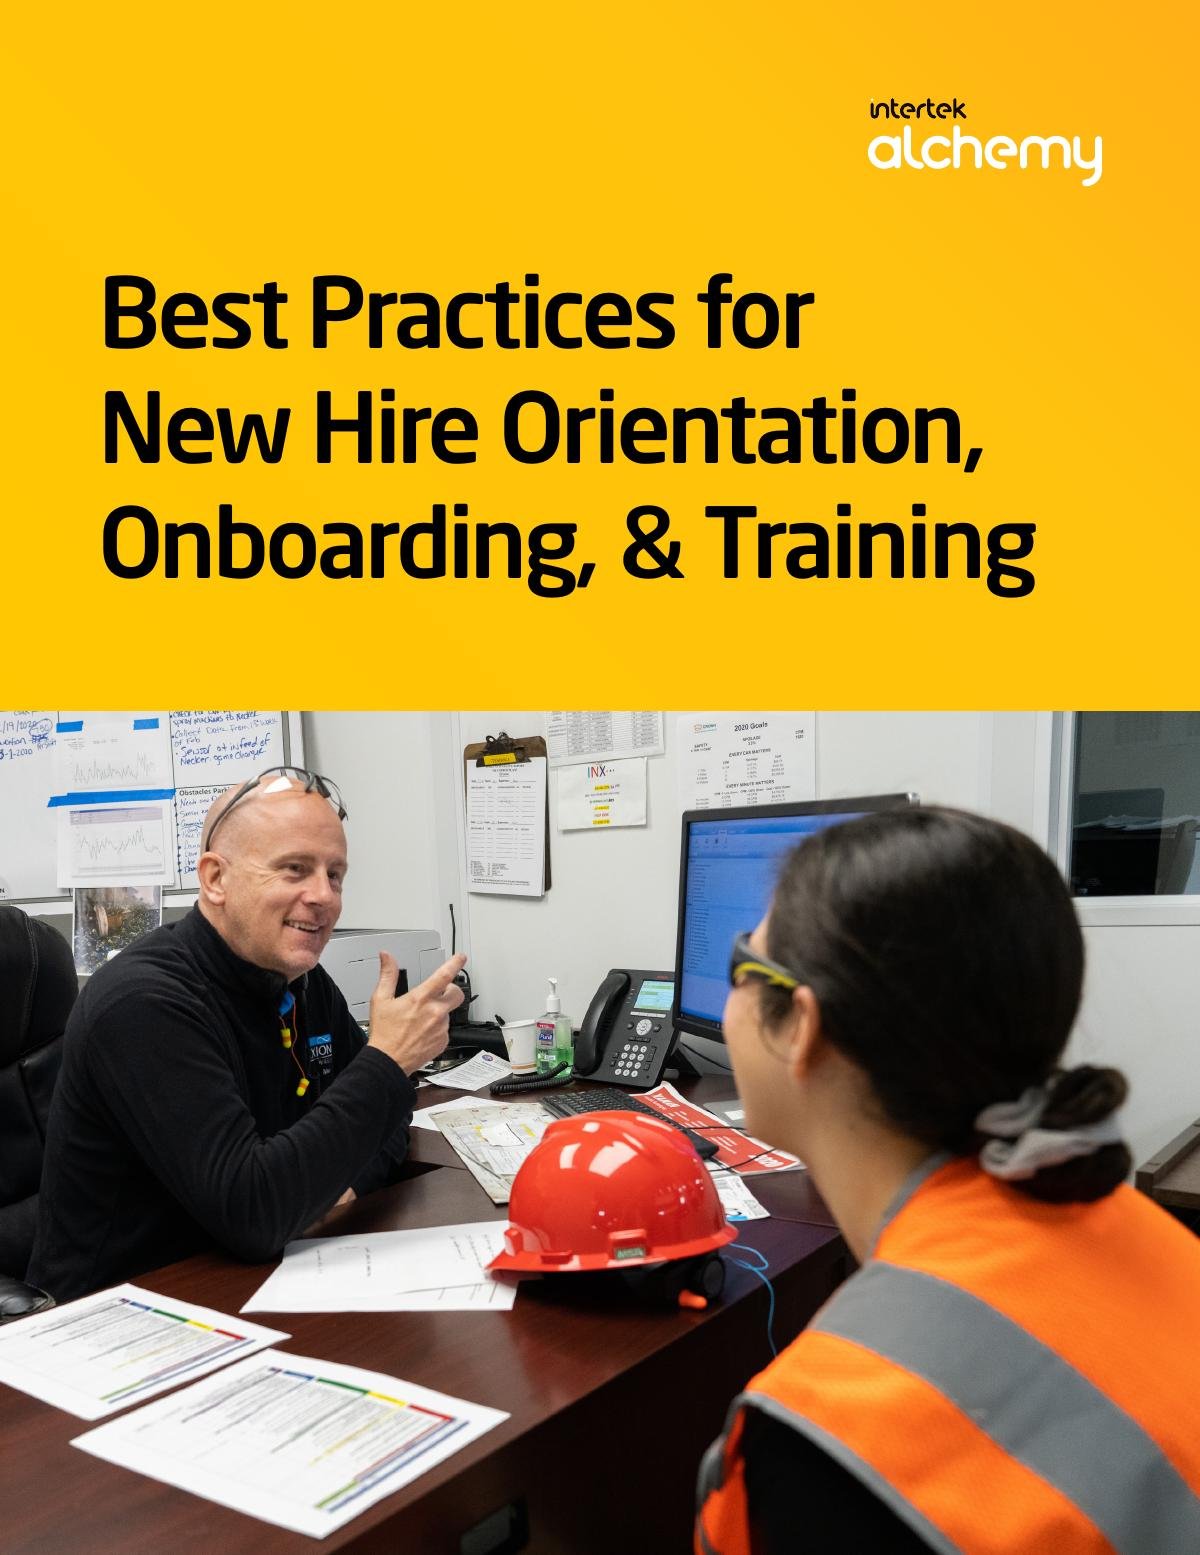 Best Practices for New Hire Orientation, Onboarding, & Training